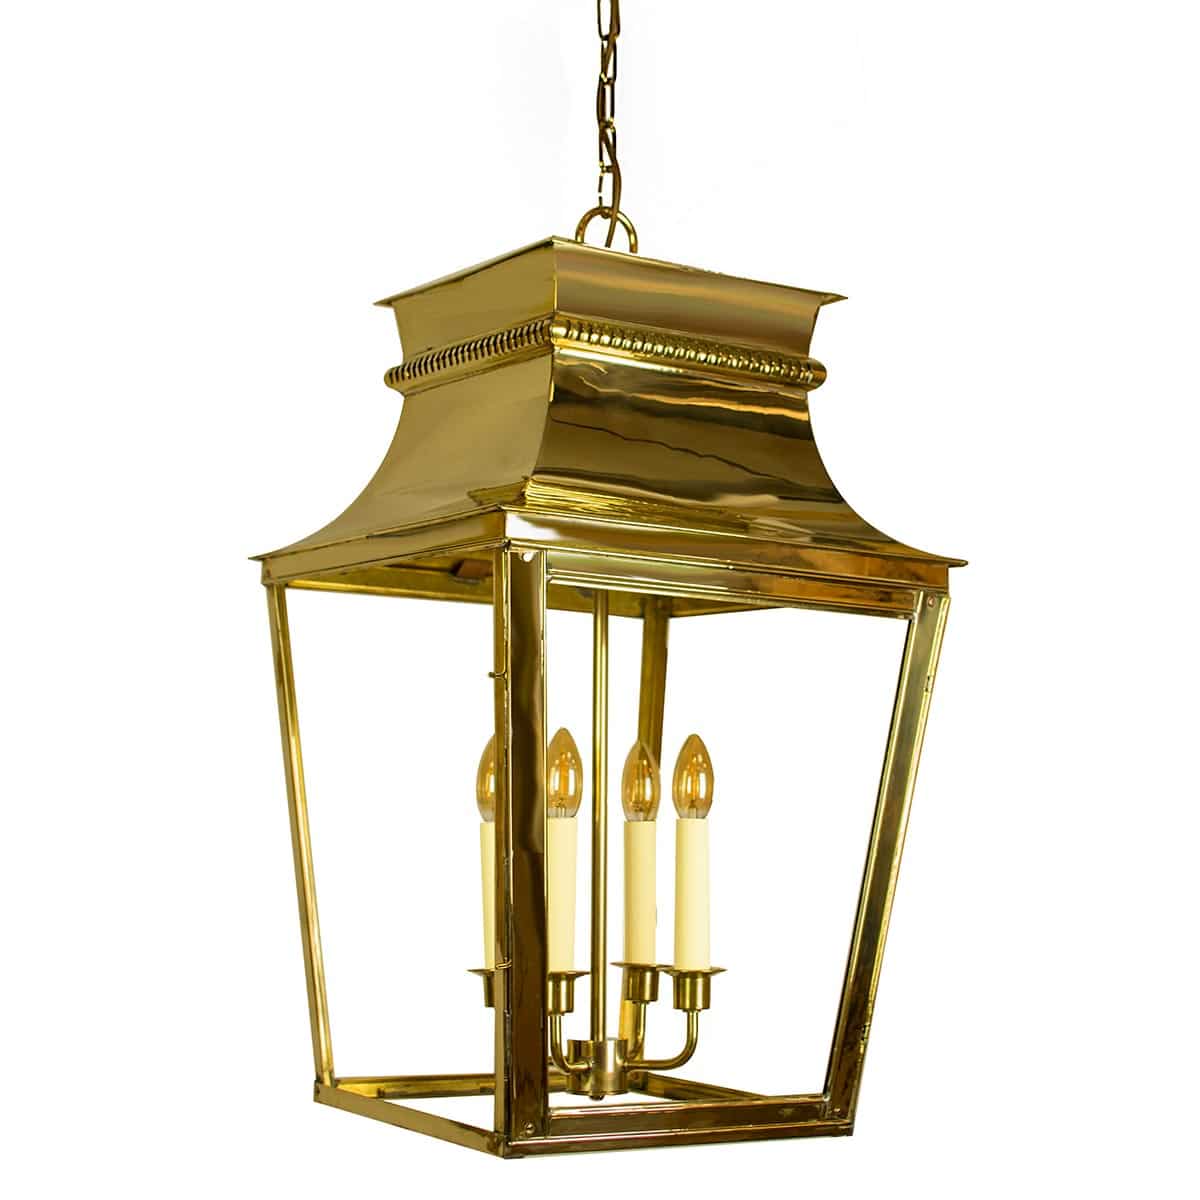 Parisienne Extra Large 4 Light Hanging Chain Lantern Solid Brass